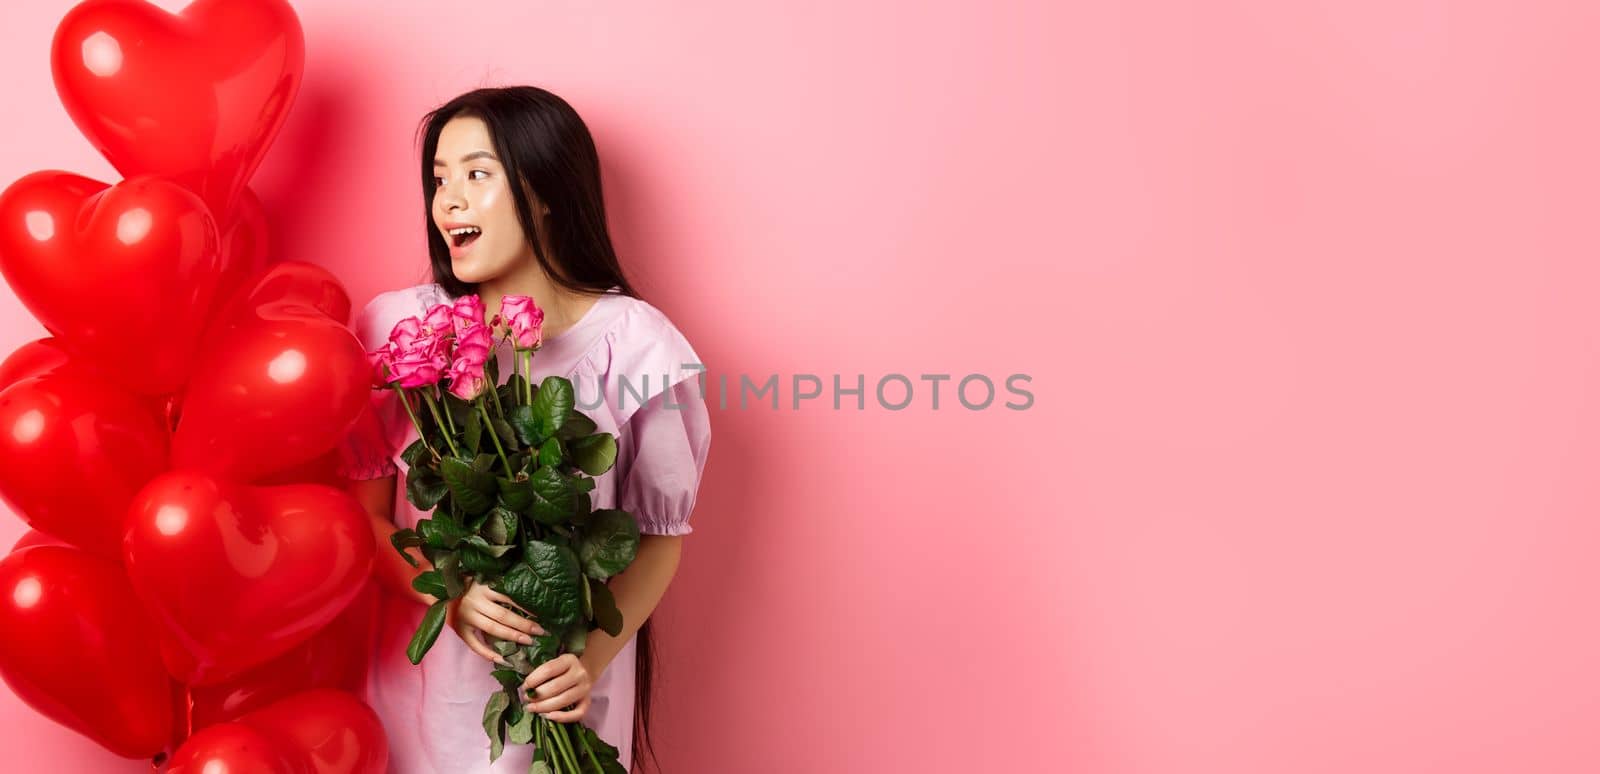 Portrait of asian teenage girl in love, holding flowers and looking at valentines day heart balloons, being on romantic date, pink background.